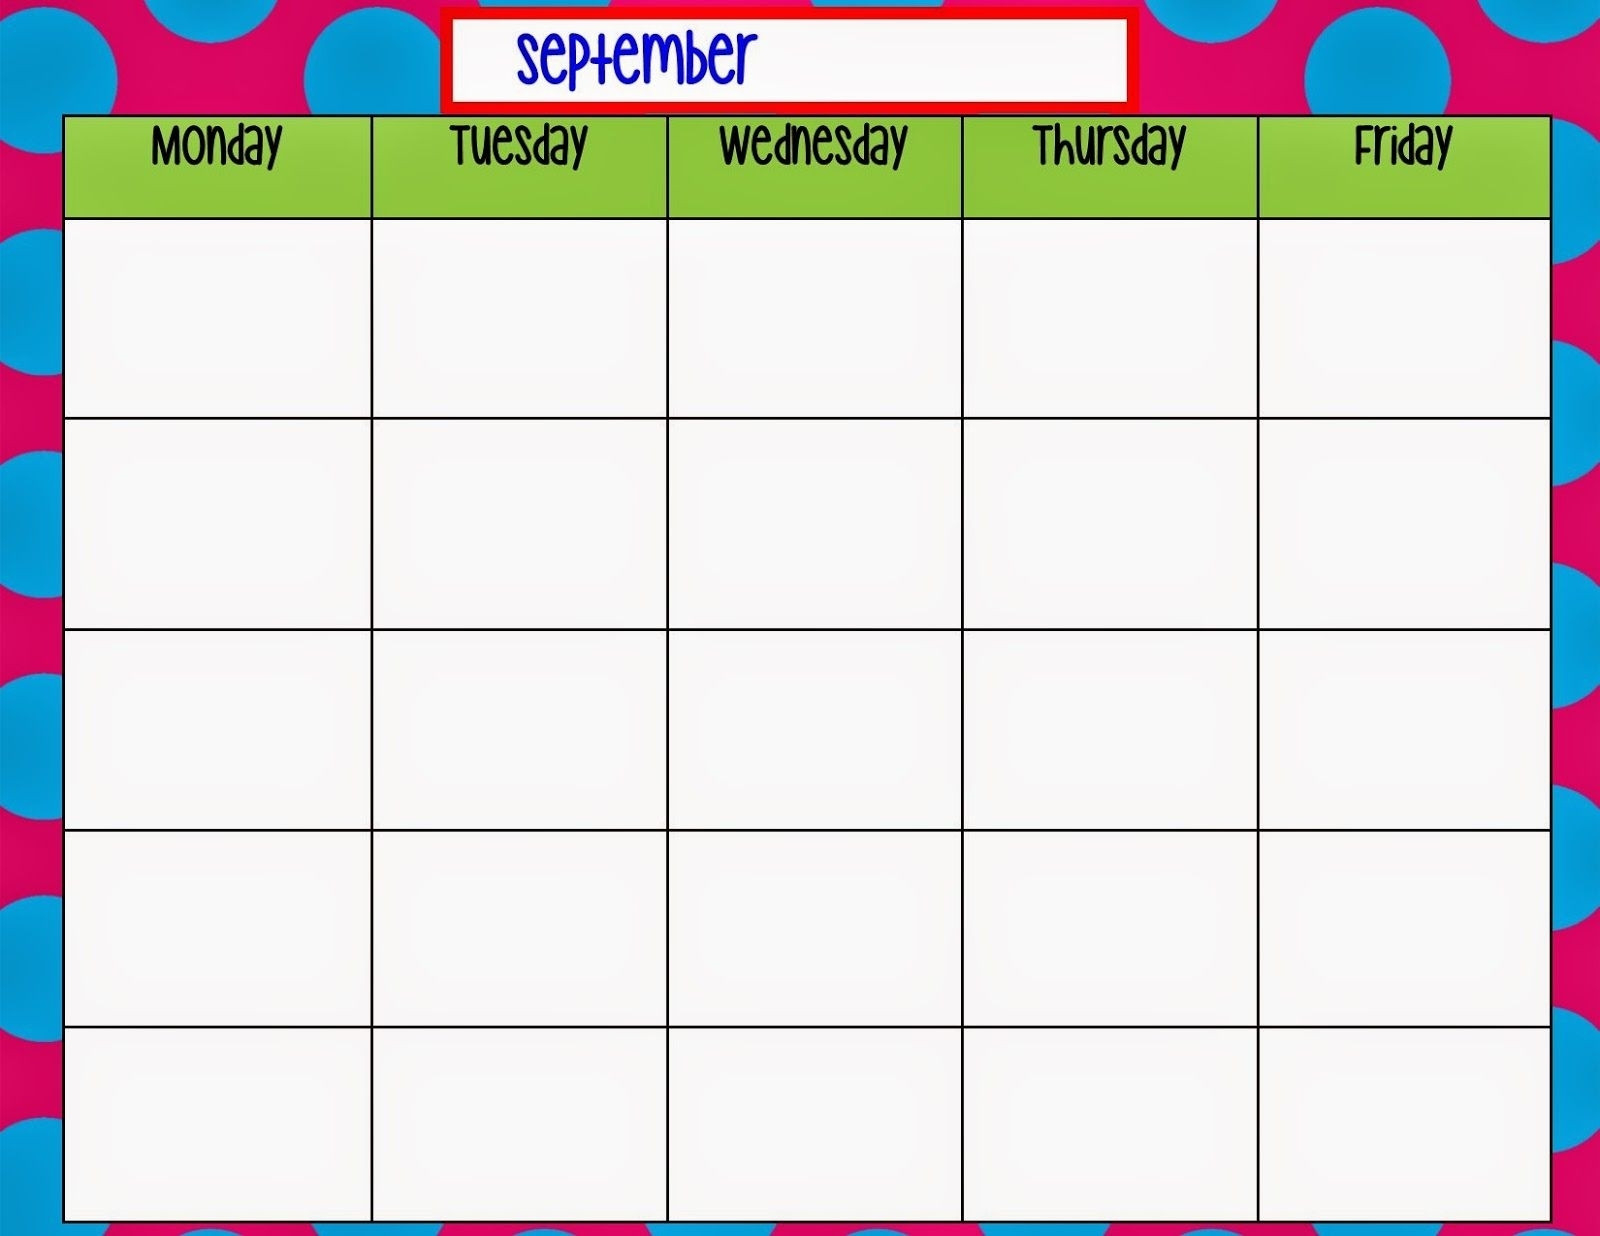 Printable Weekly Schedule Monday Through Friday - Calendar  Free Monday Through Friday Calendar Templates